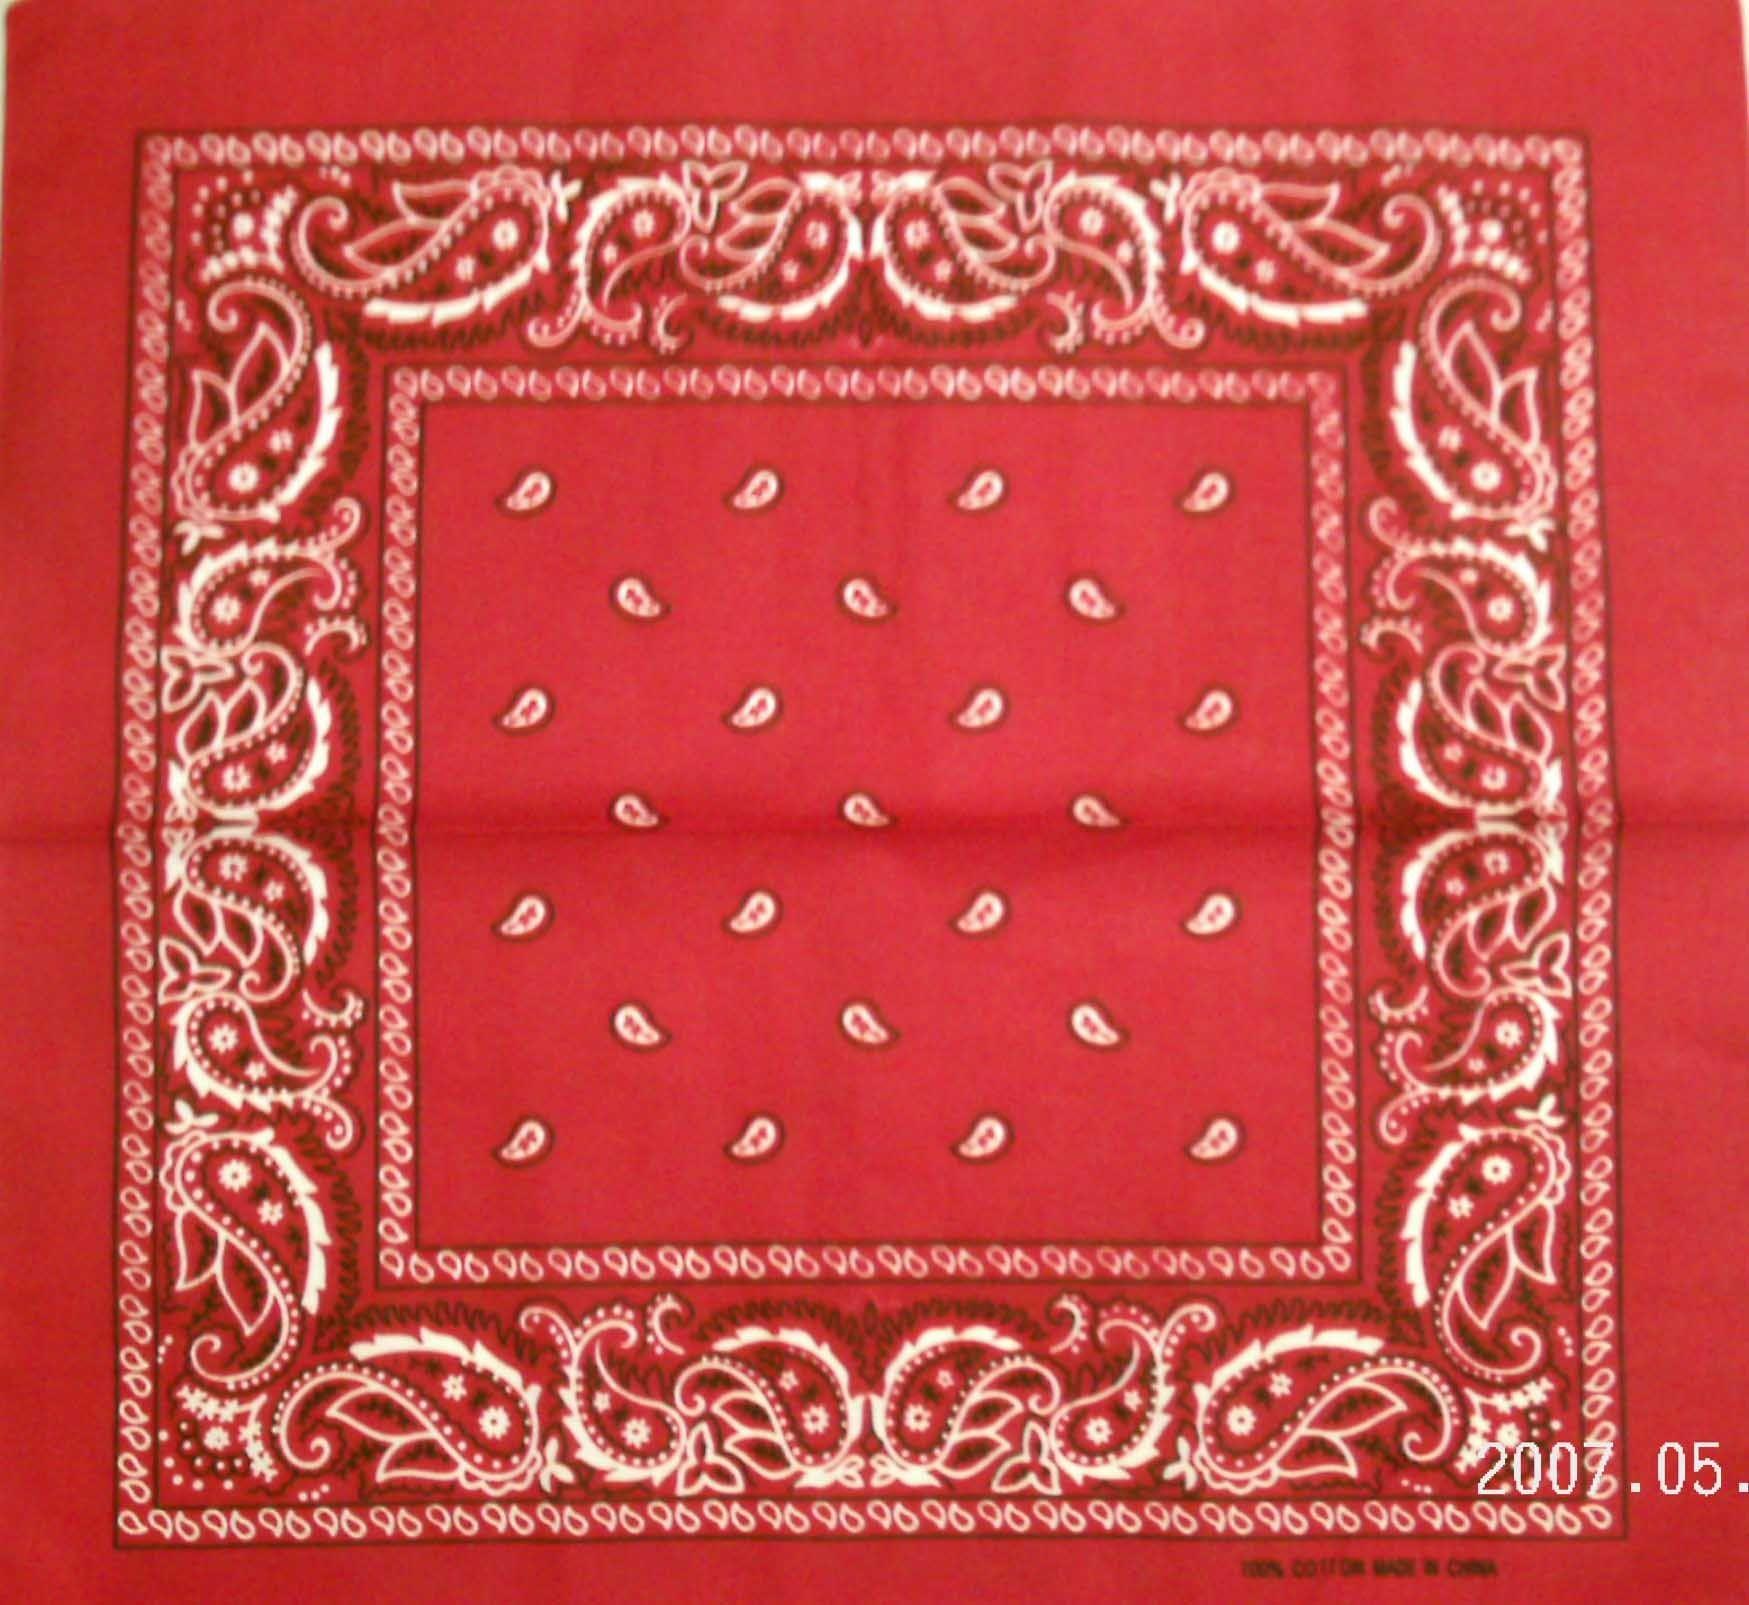 Red Bandana Wallpapers - Top Free Red Bandana Backgrounds ...